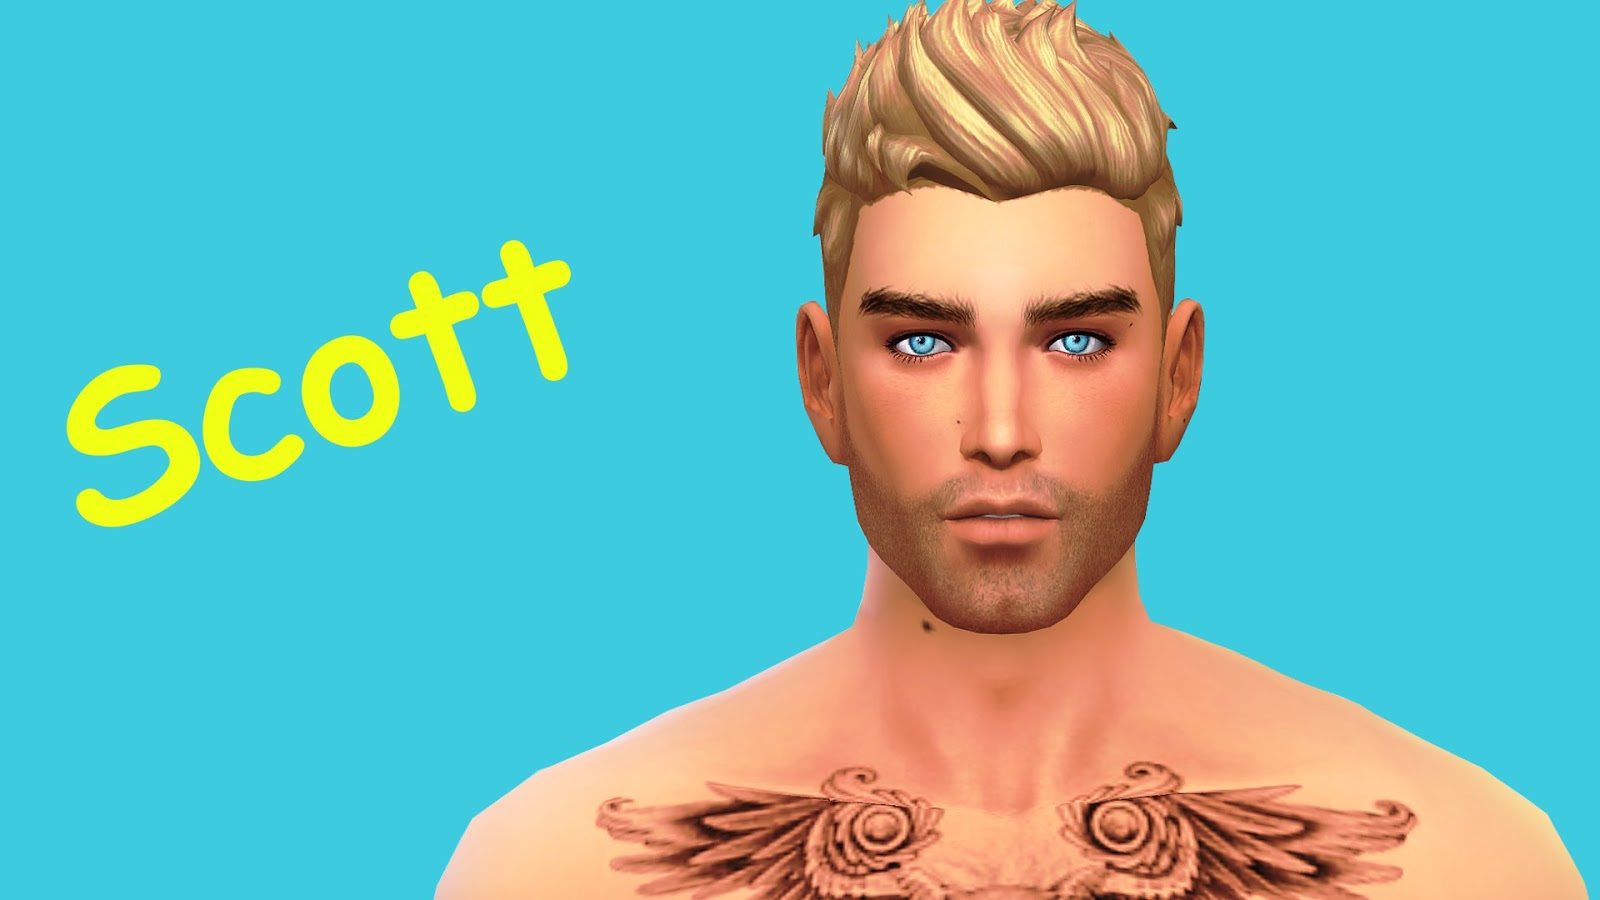 sims 4 sims male download tumblr